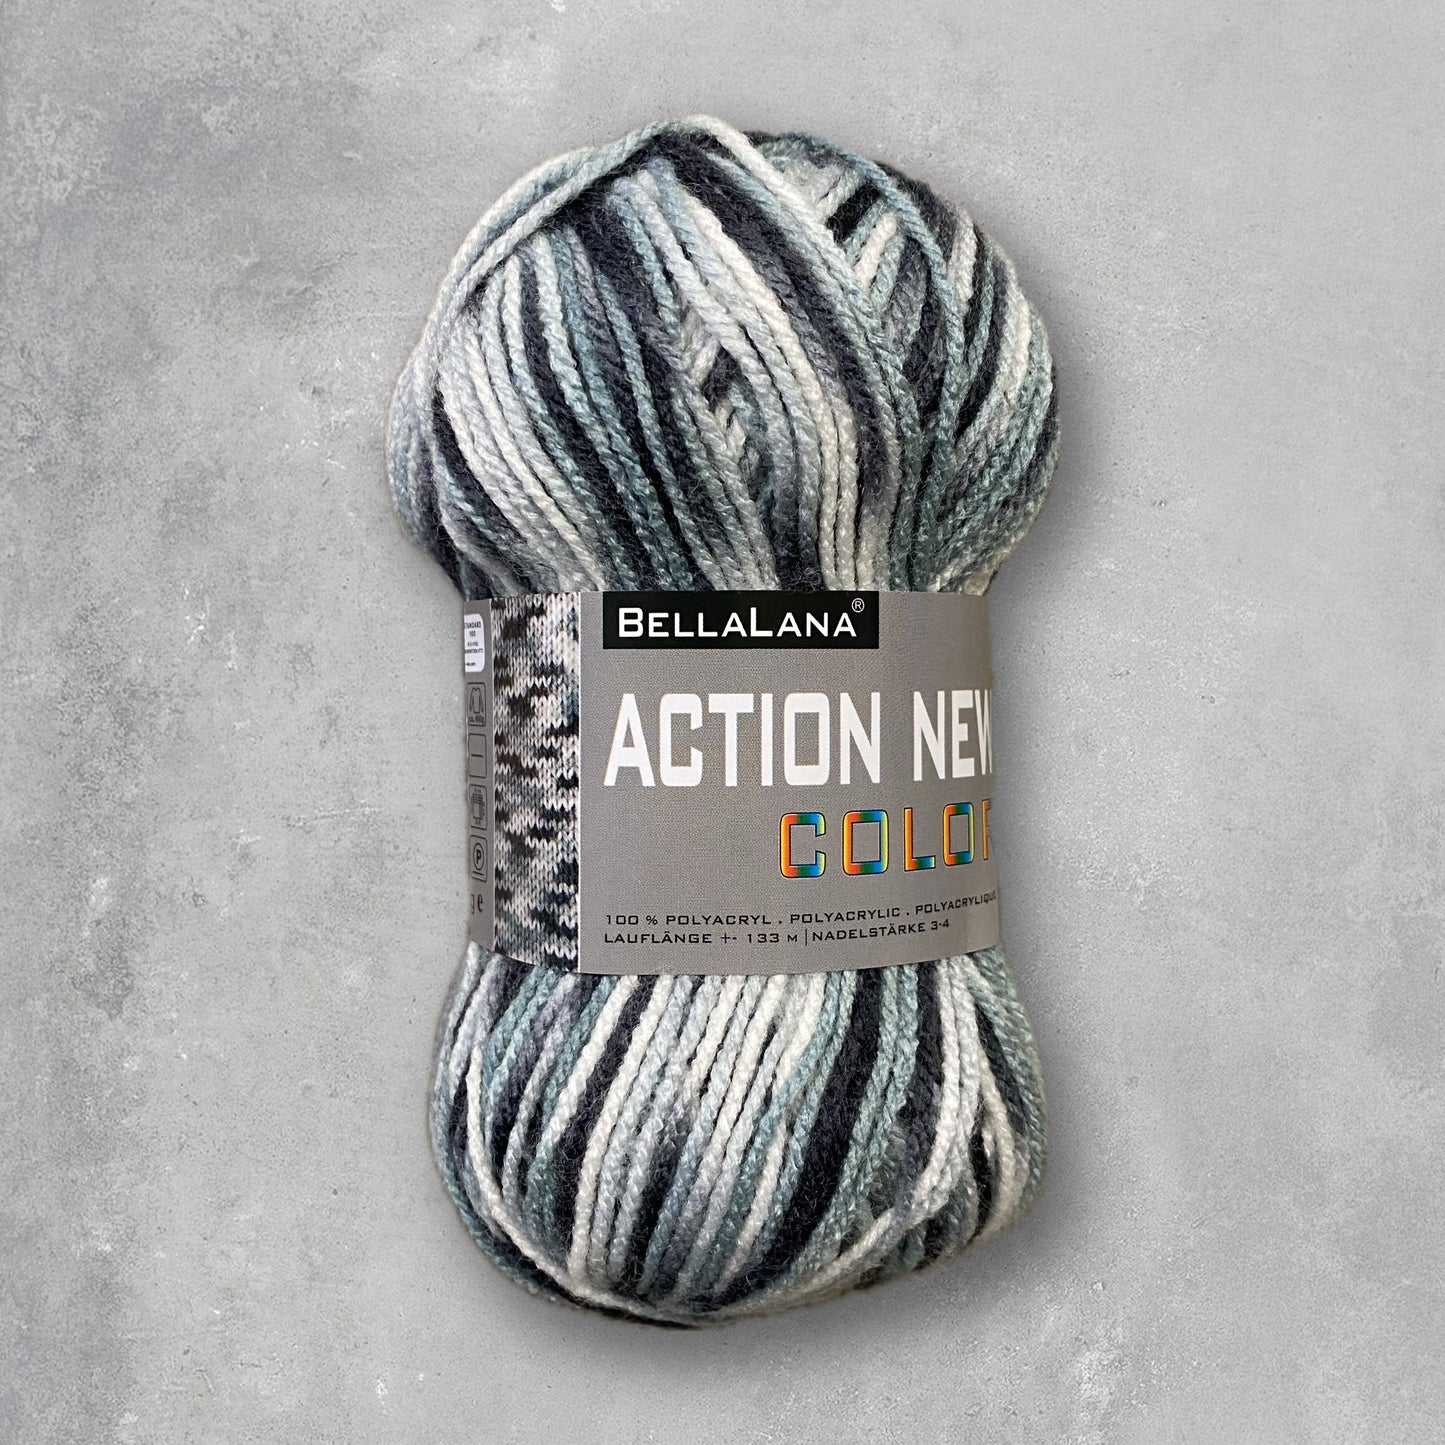 ACTION NEW color